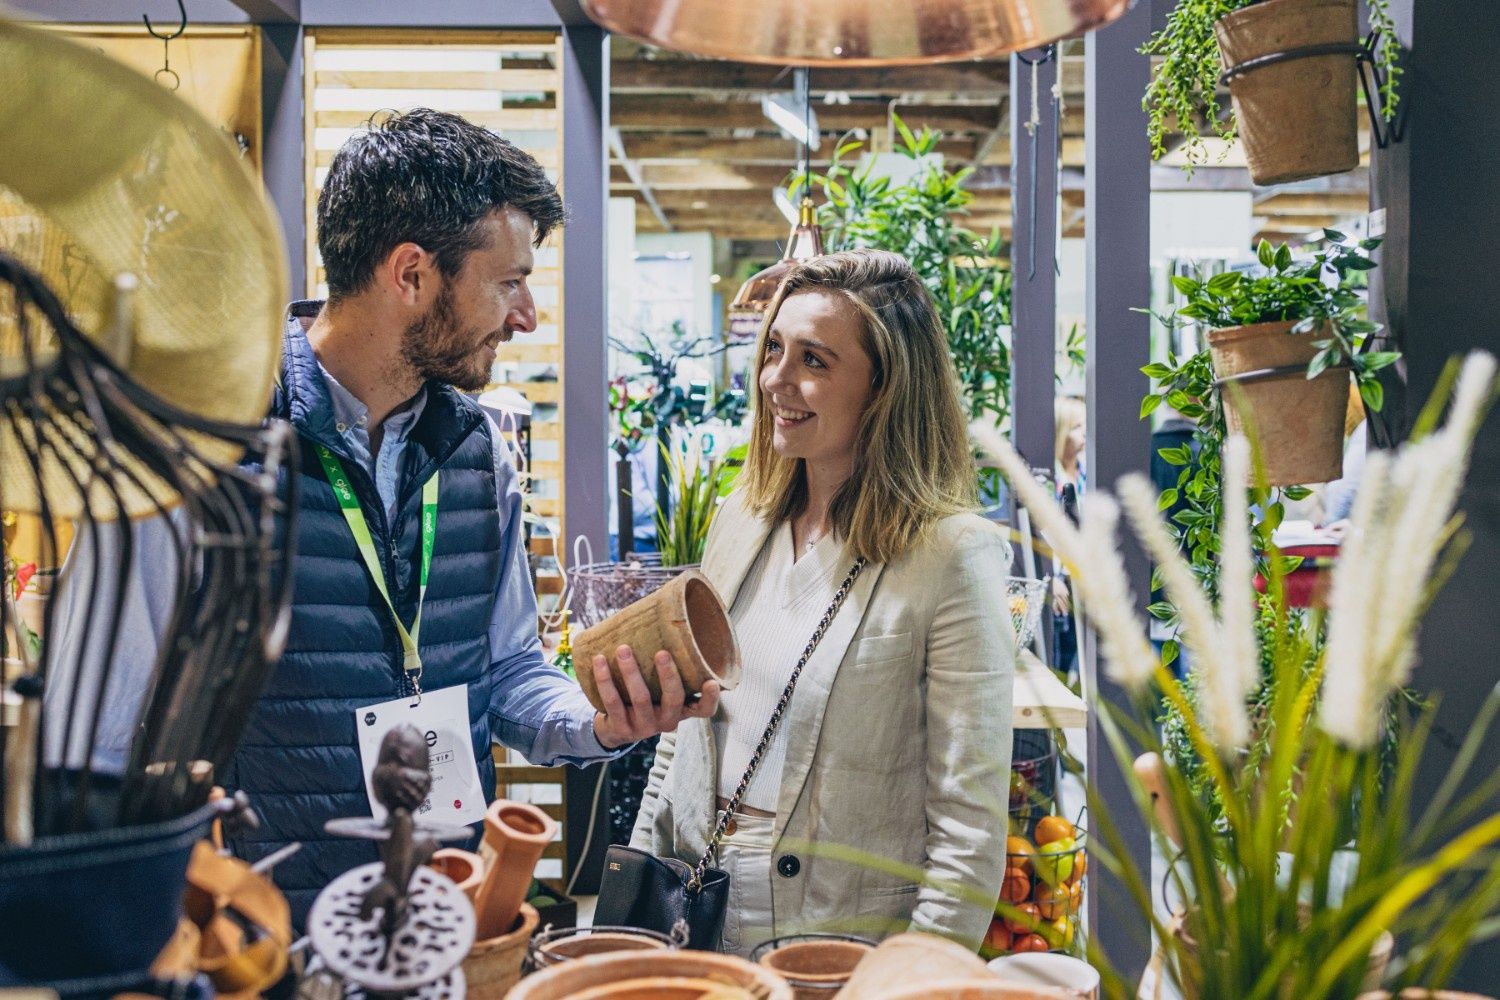 A man in a navy blue gilet holding a plant pot and a woman in a white blazer looking at each other and smiling